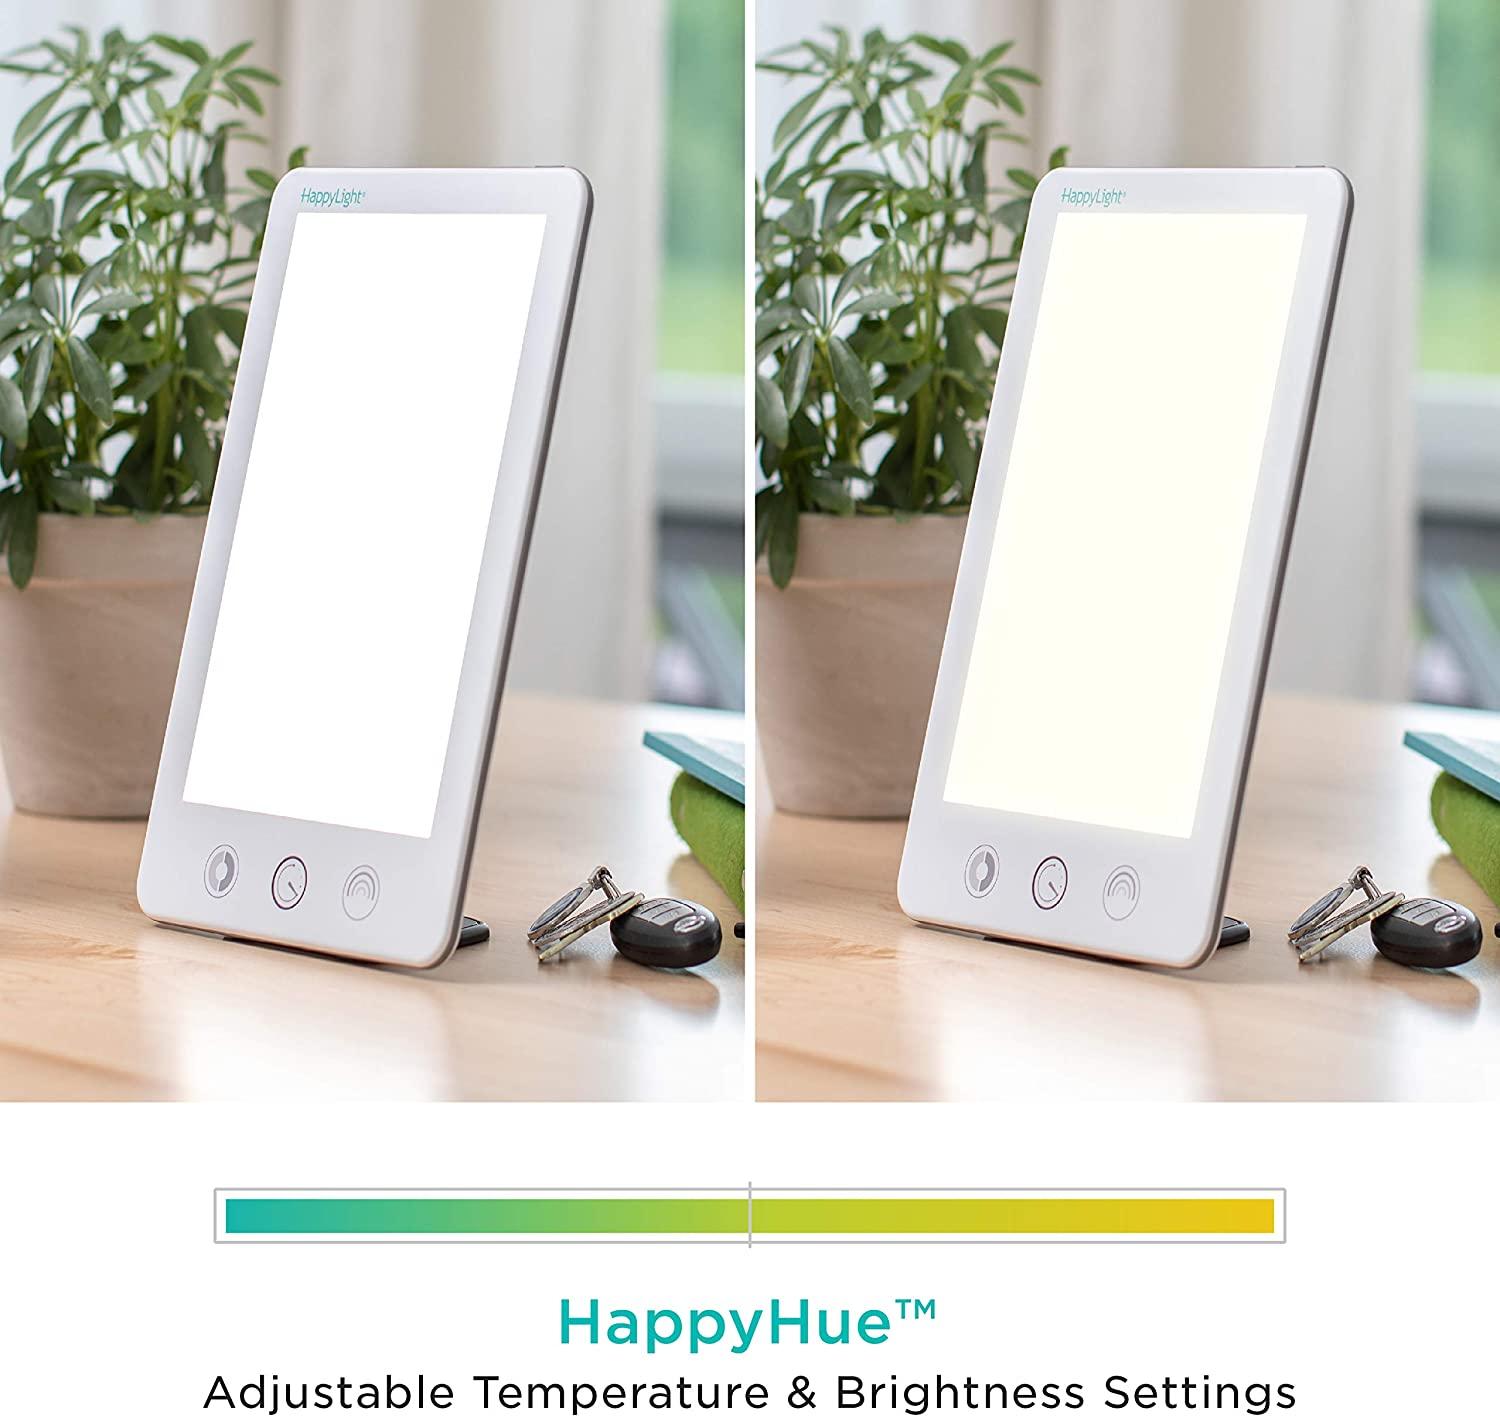 HappyLight® Luxe 10,000 lux Light Therapy Lamp w/Timer